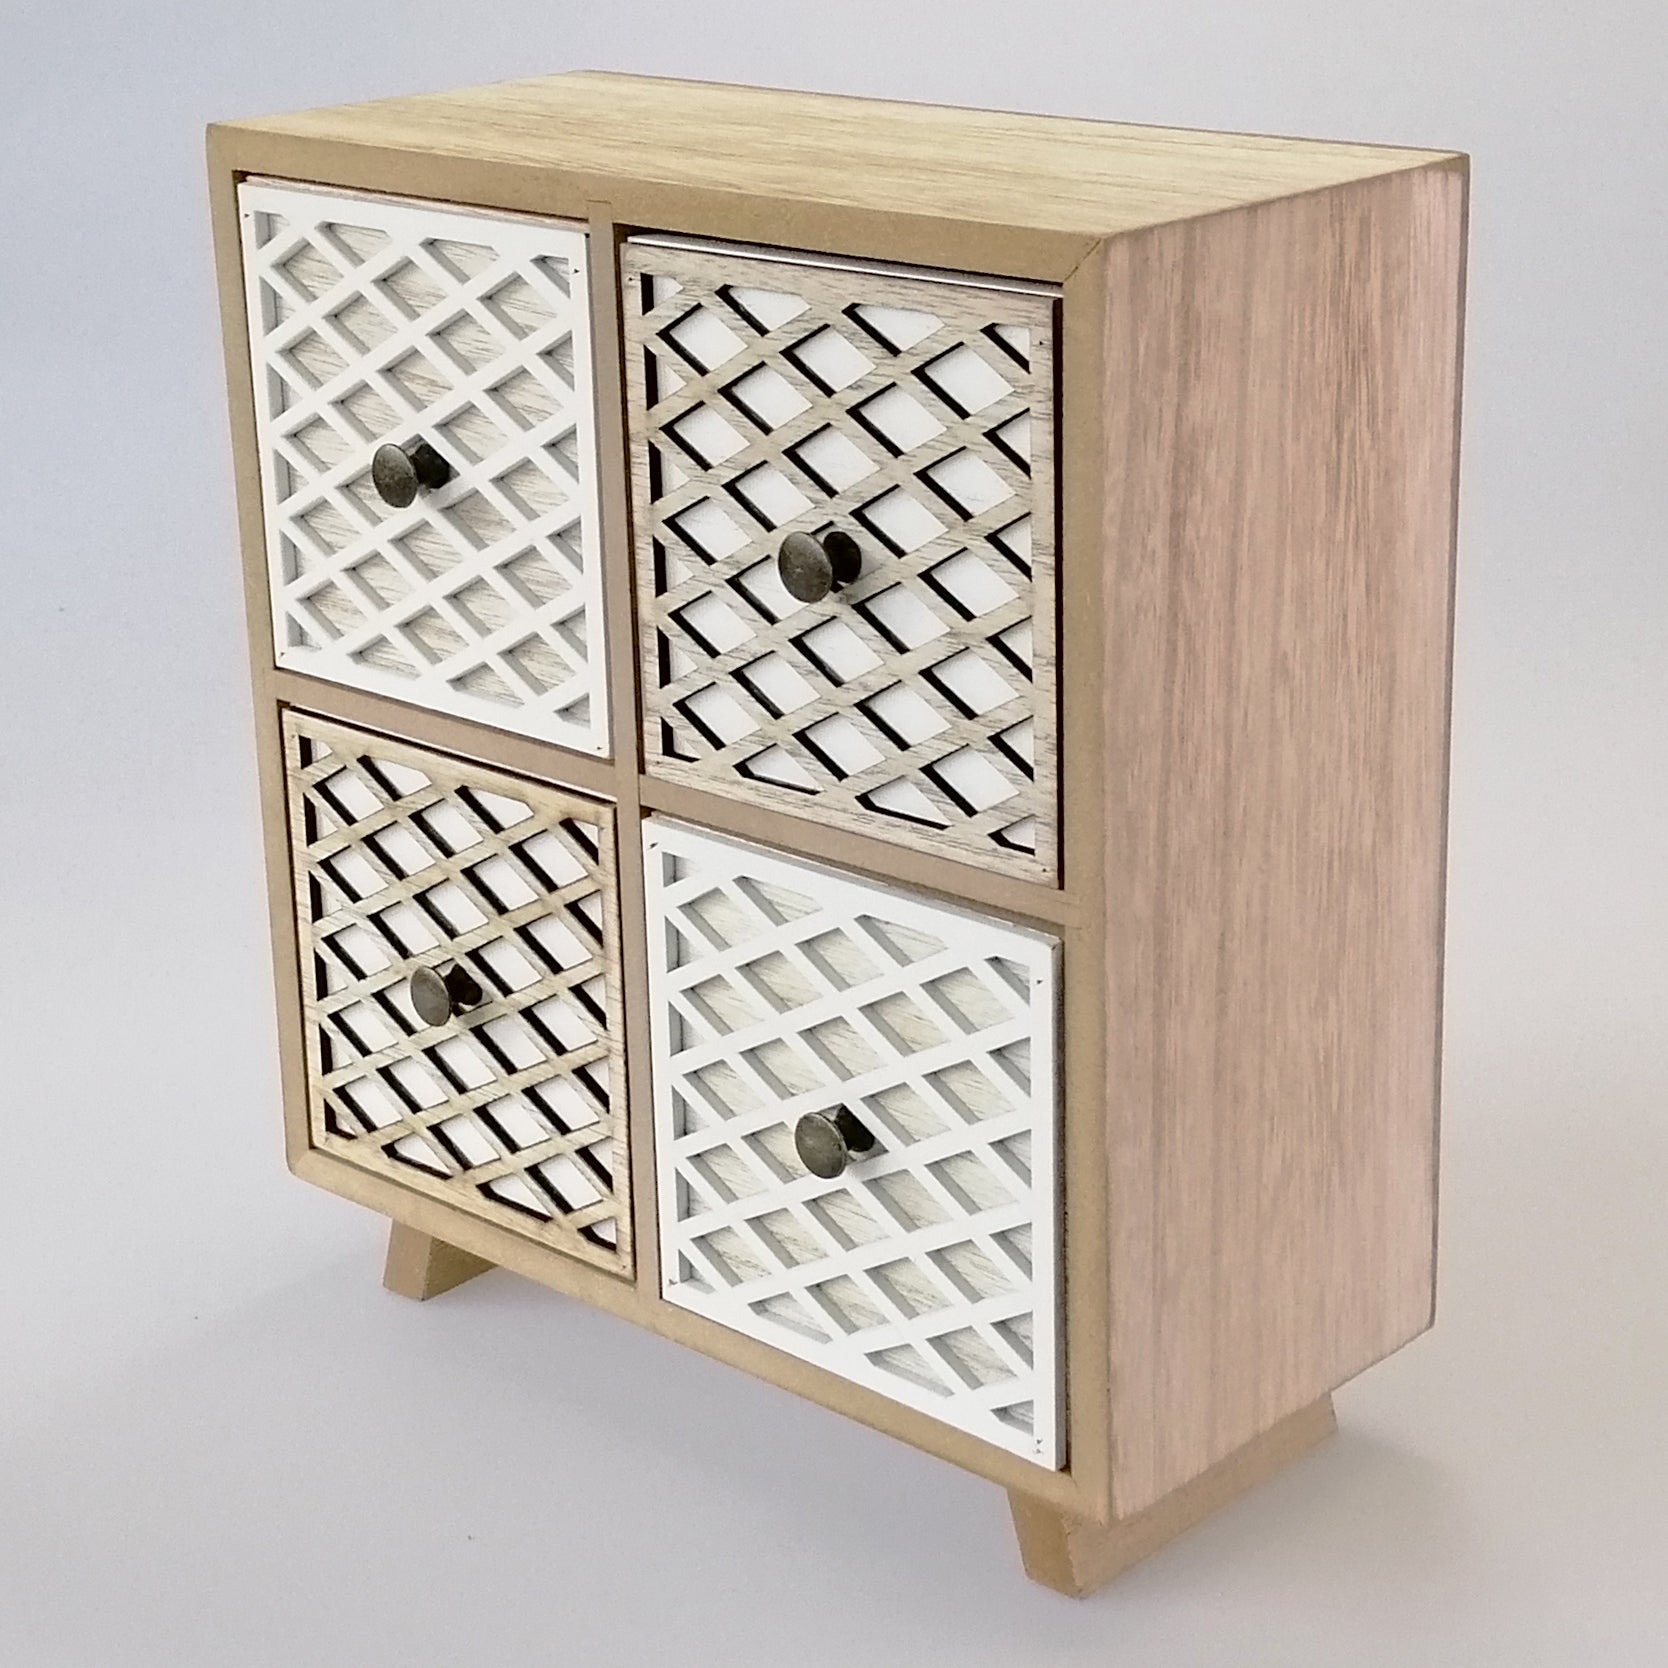 Woodbox - Natural Criss-Cross Four Drawers Set